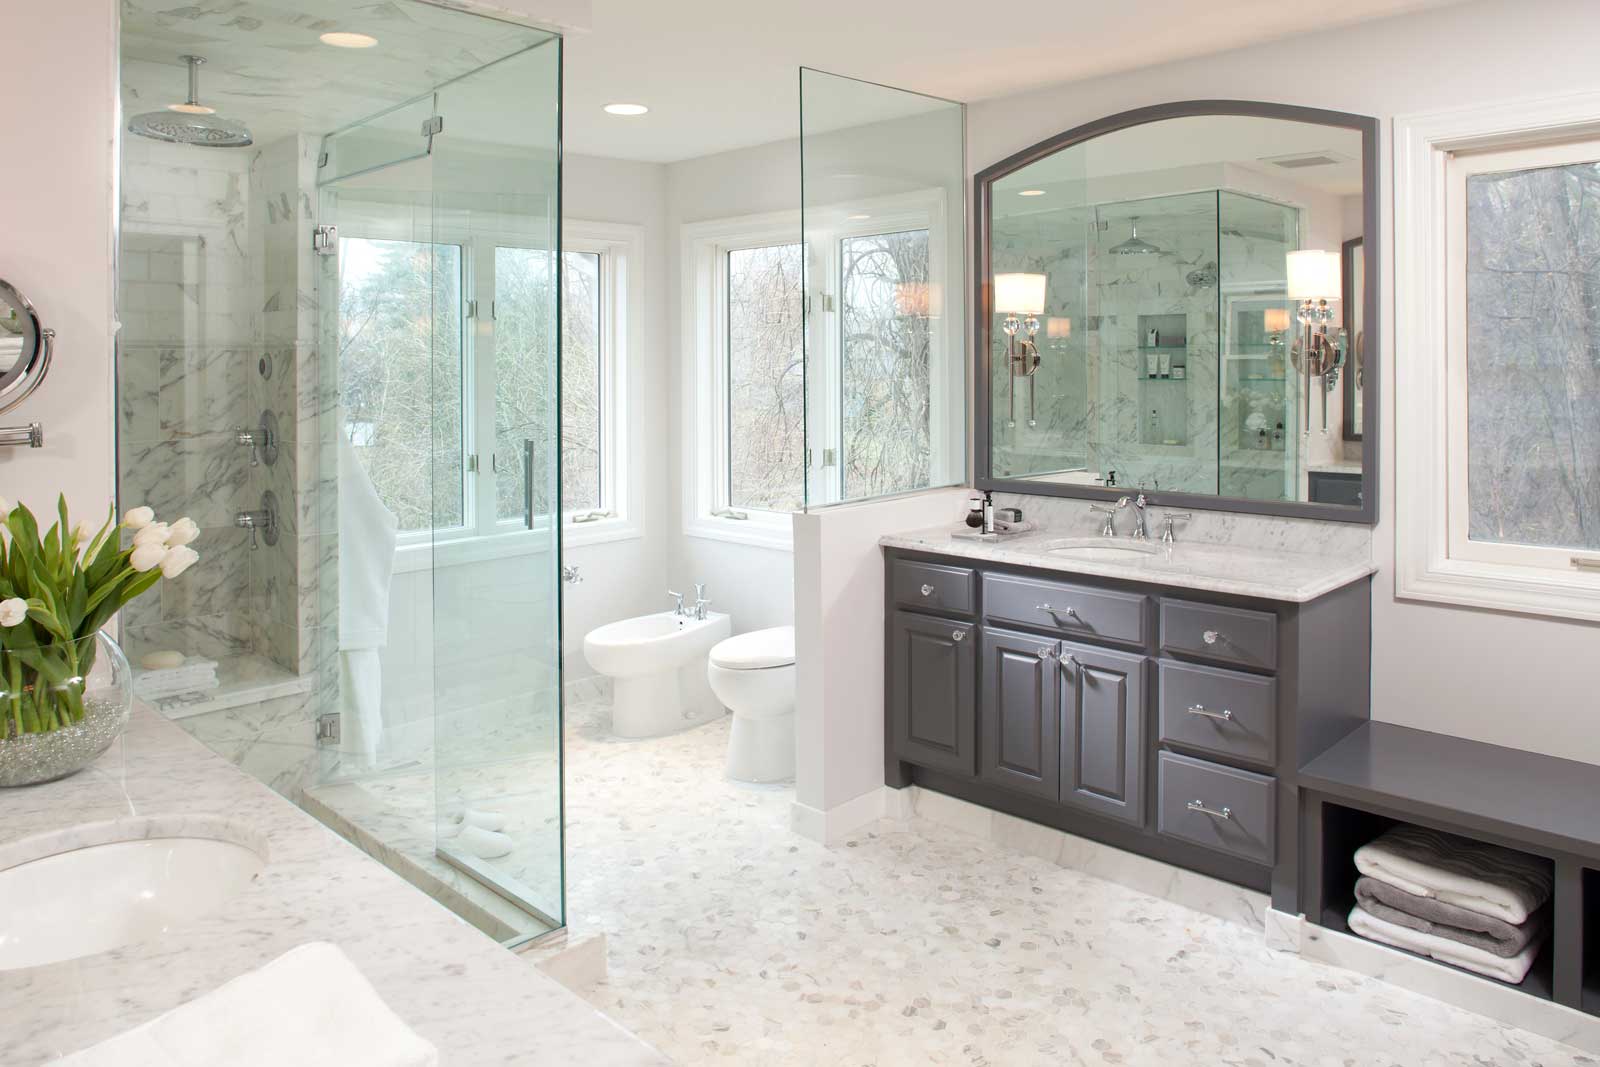 White Master With Awesome White Master Bathroom Remodel With Modern White Small Bathroom Sinks Remodel And Contemporary Mirror Decorative Bathroom Design Also Colorful Ceramic Bathroom Model Ideas Bathroom The Most Effective Bathroom Remodel: Toilet And Floor